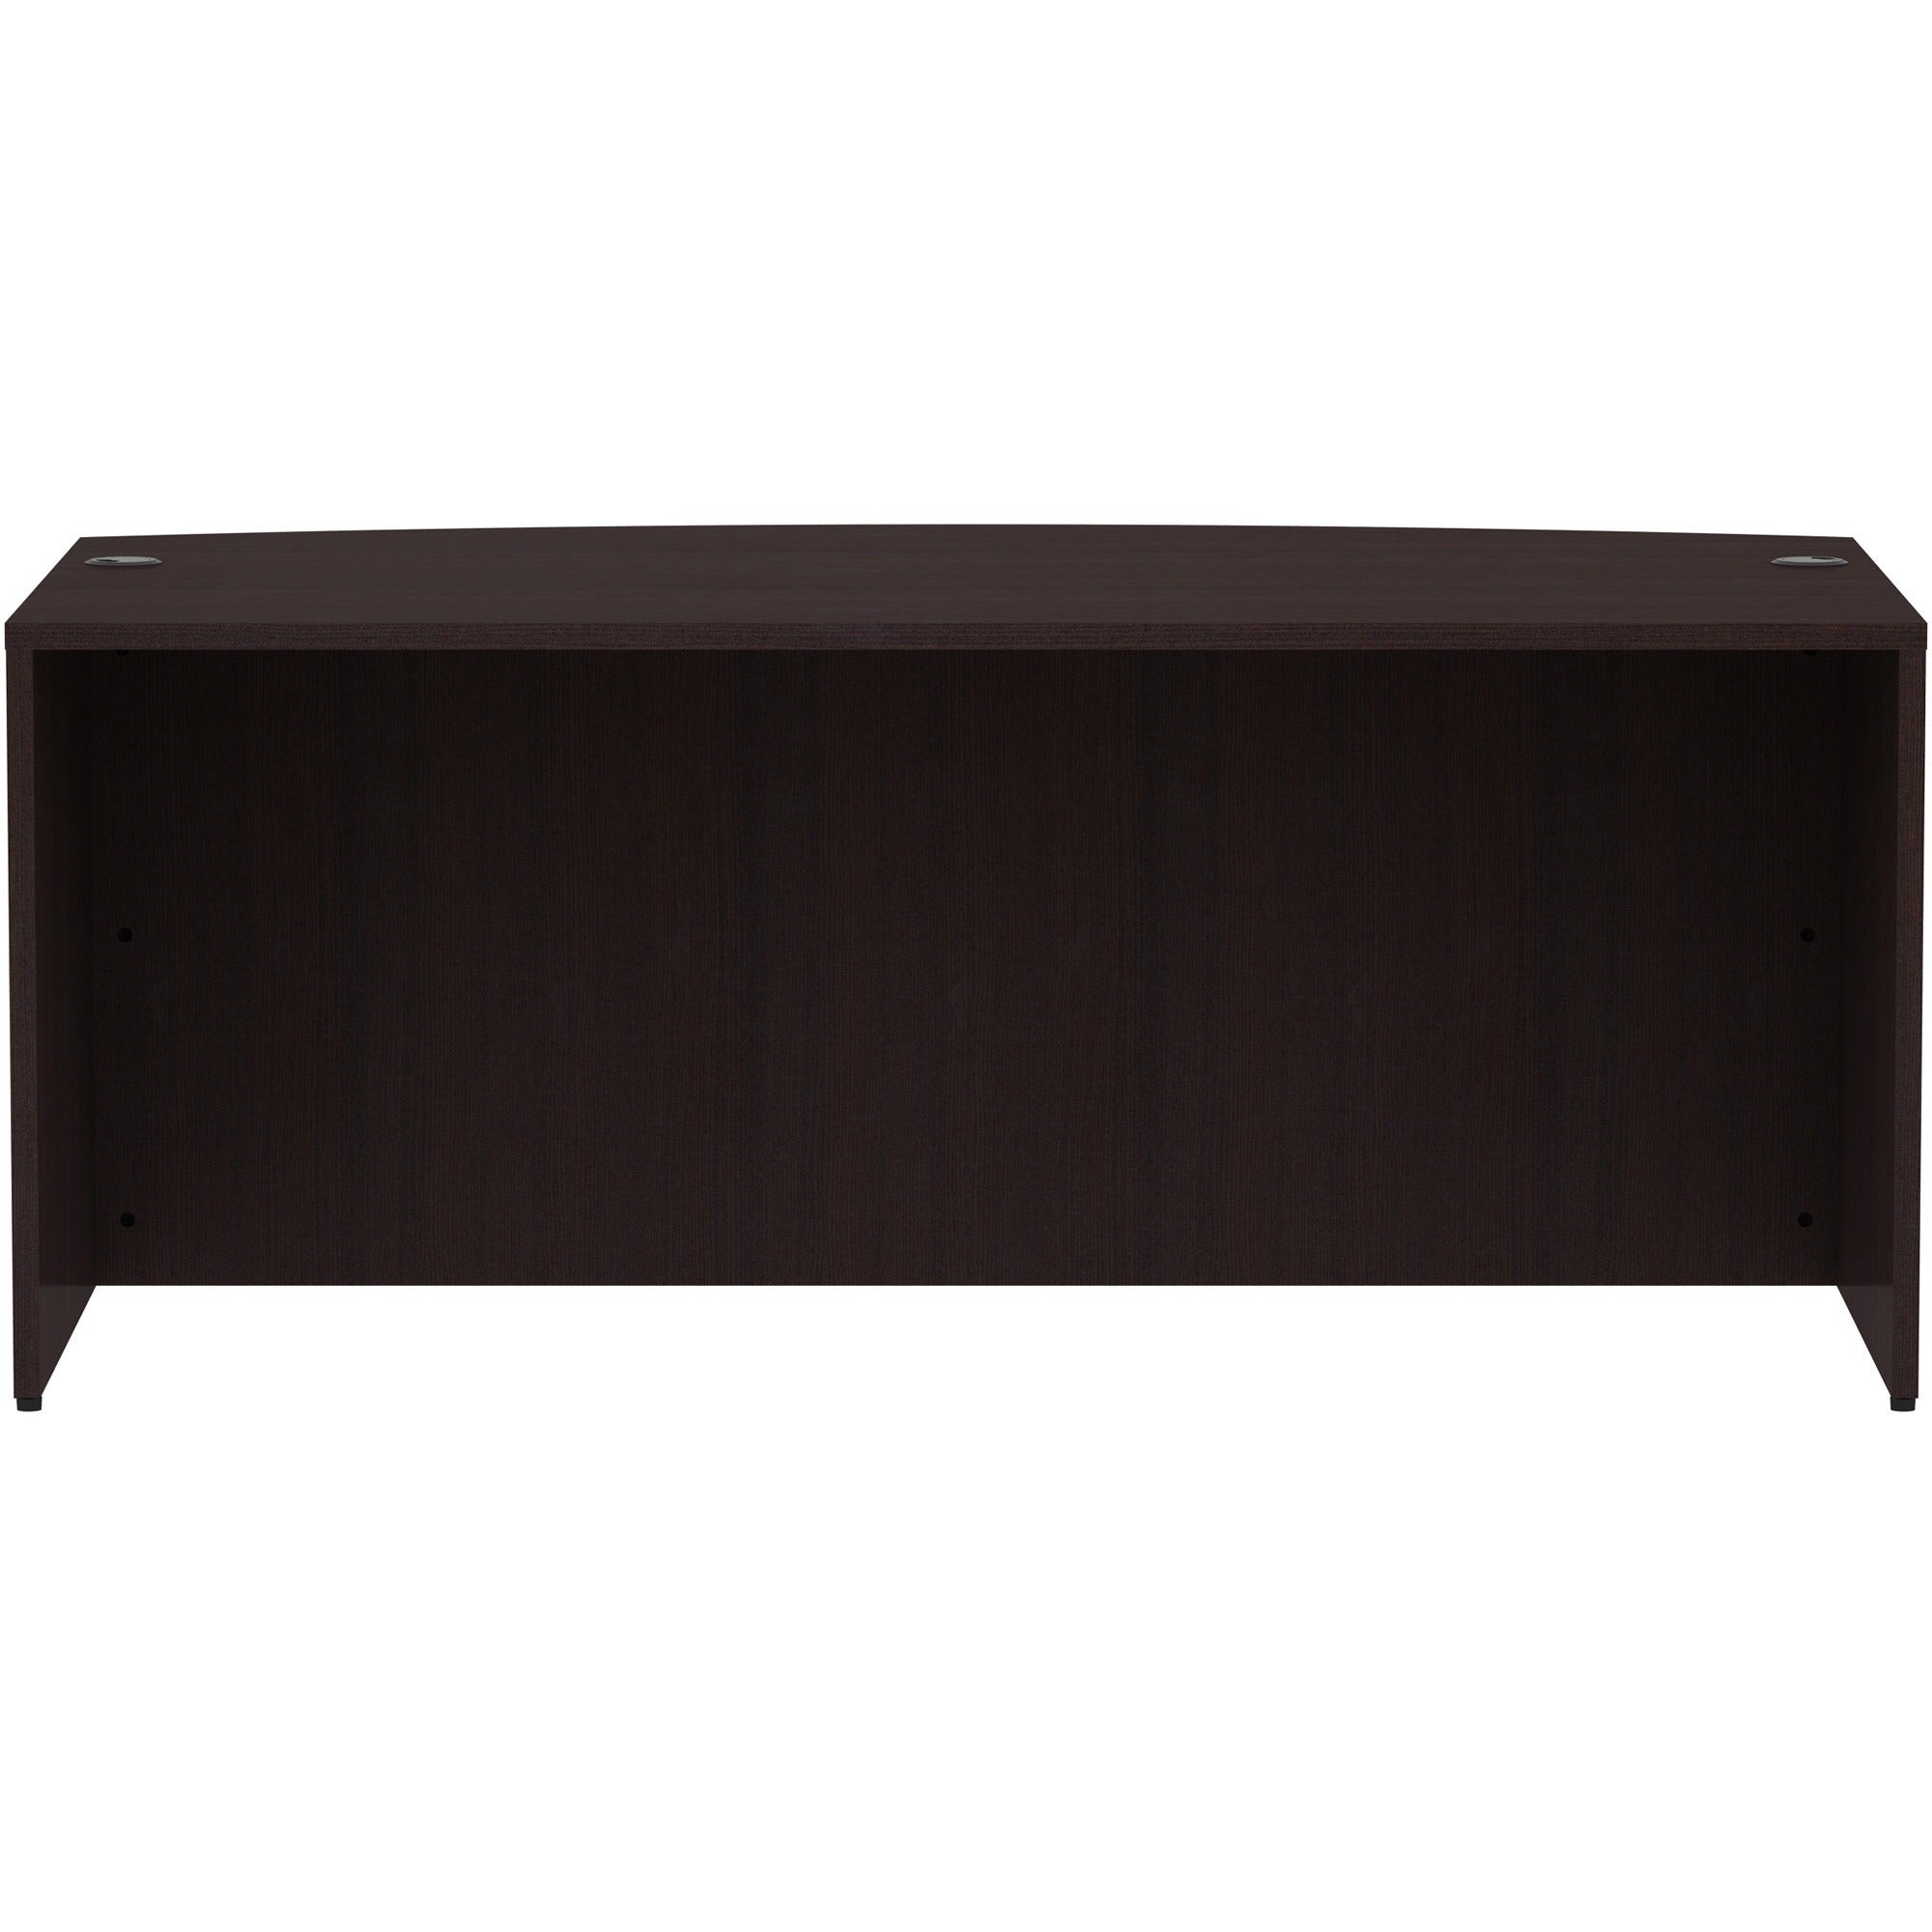 lorell-essentials-series-bowfront-desk-shell-72-x-414295-desk-shell-1-top-bow-front-edge-finish-espresso-laminate_llr18260 - 2